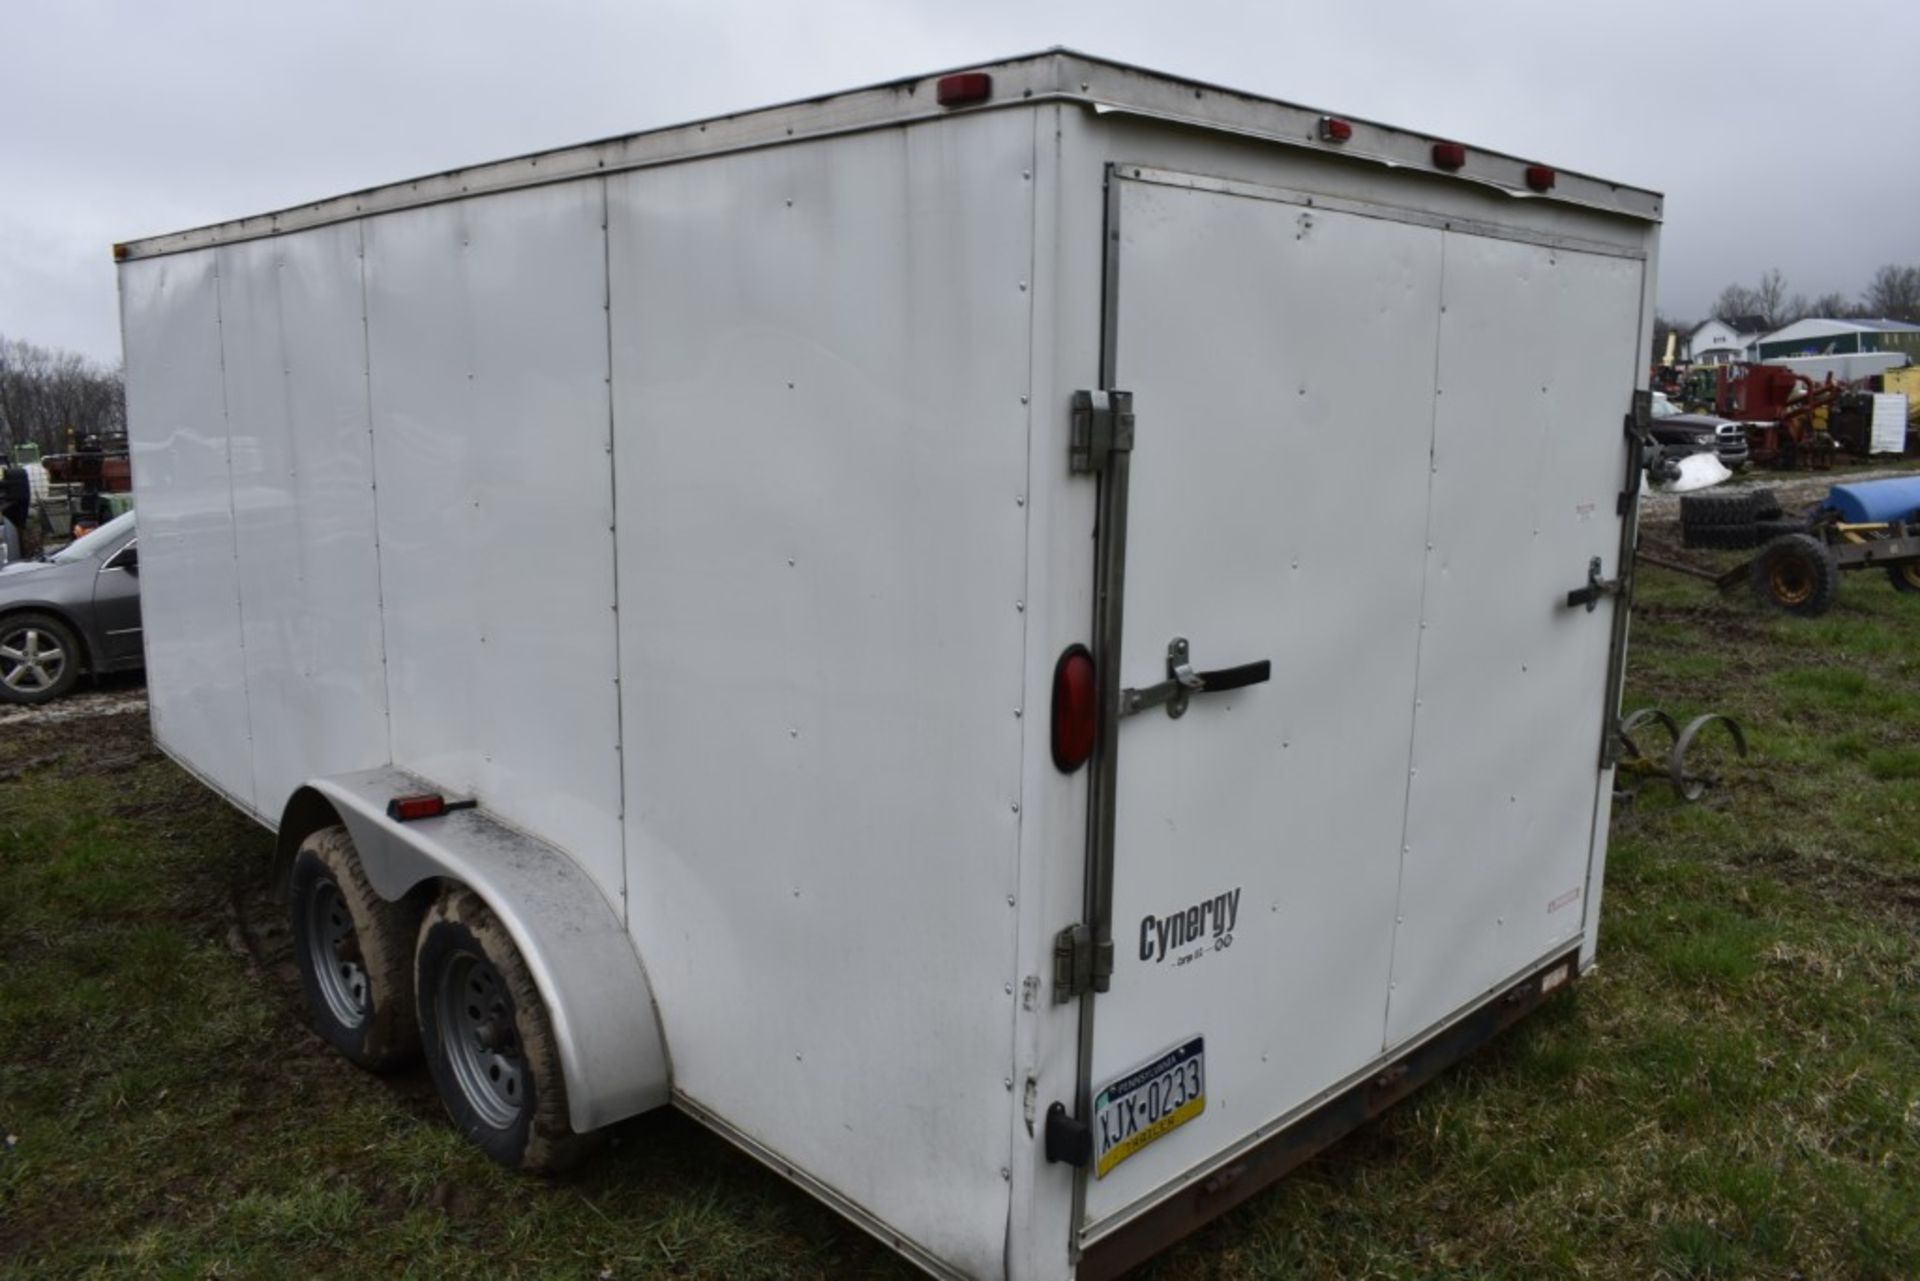 2013 Cynergy Enclosed Trailer - Image 3 of 11